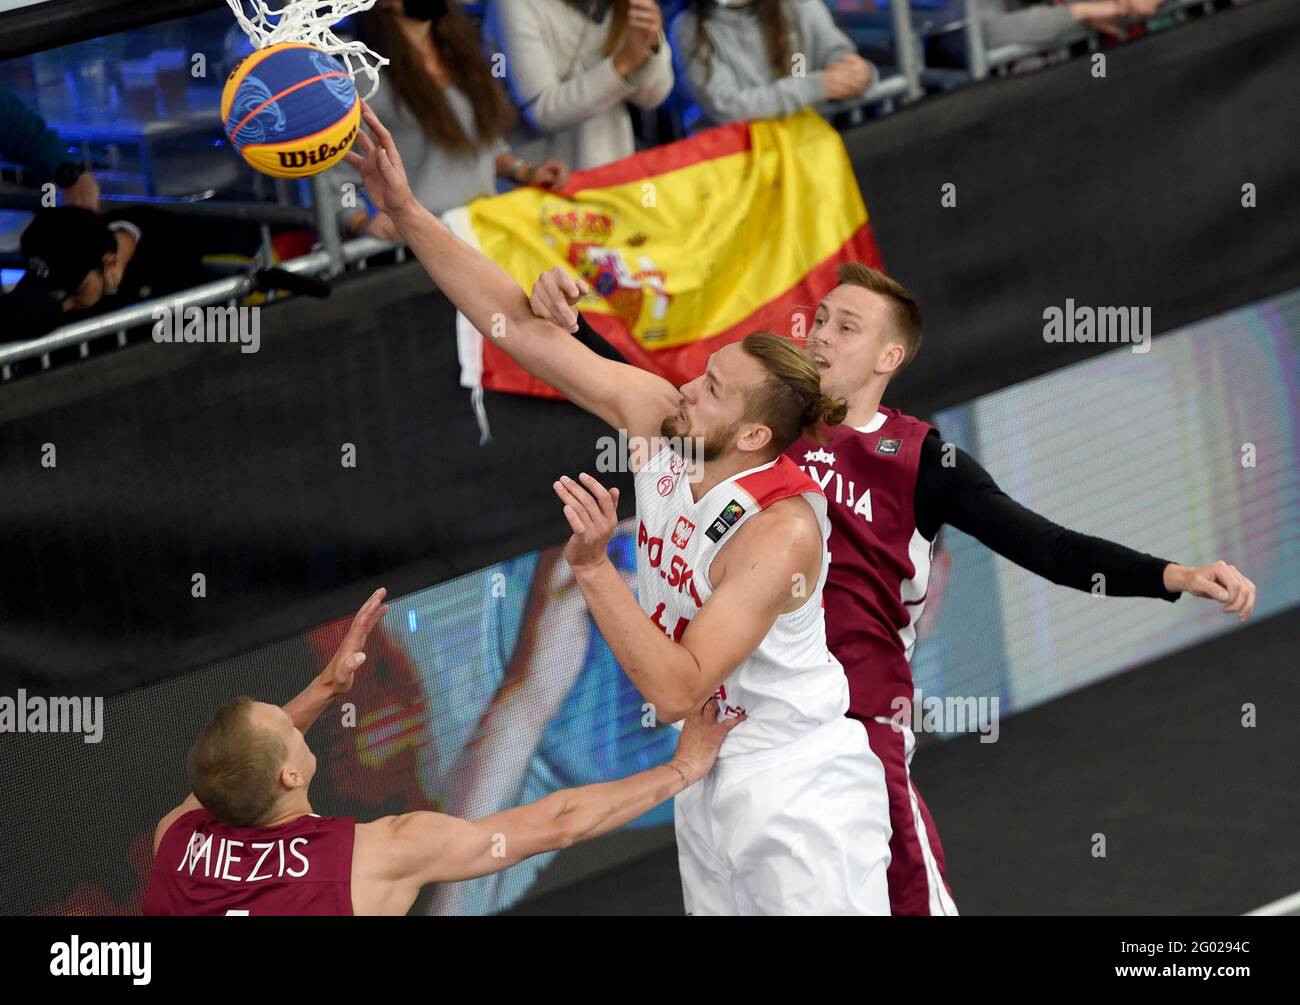 Graz, Austria. 30th May, 2021. Szymon Rduch (C) of Poland goes for the basket during a match between Poland and Latvia at the men's FIBA 3x3 Olympic Qualifying Tournament at Graz, Austria, on May 30, 2021. Credit: Wang Zhou/Xinhua/Alamy Live News Stock Photo